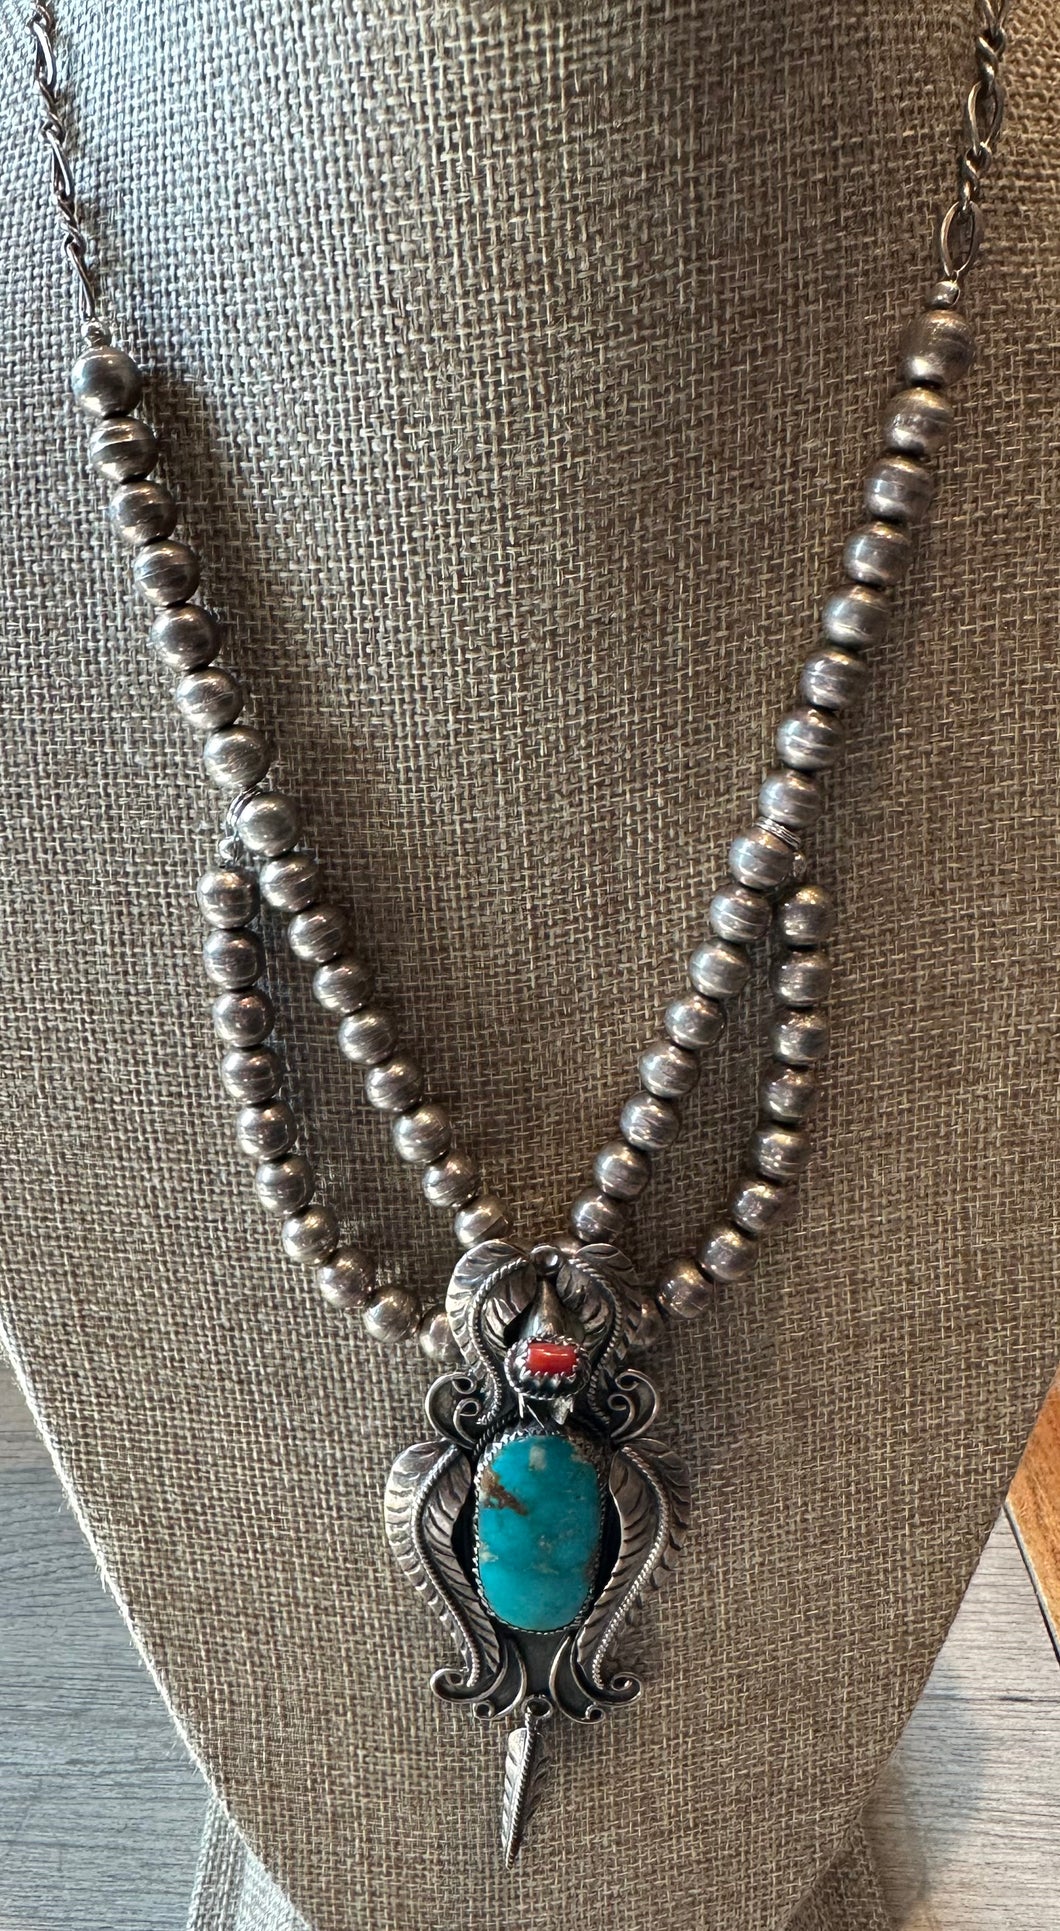 Turquoise and Coral Pendant Necklace with Double Strand of Silver Beads